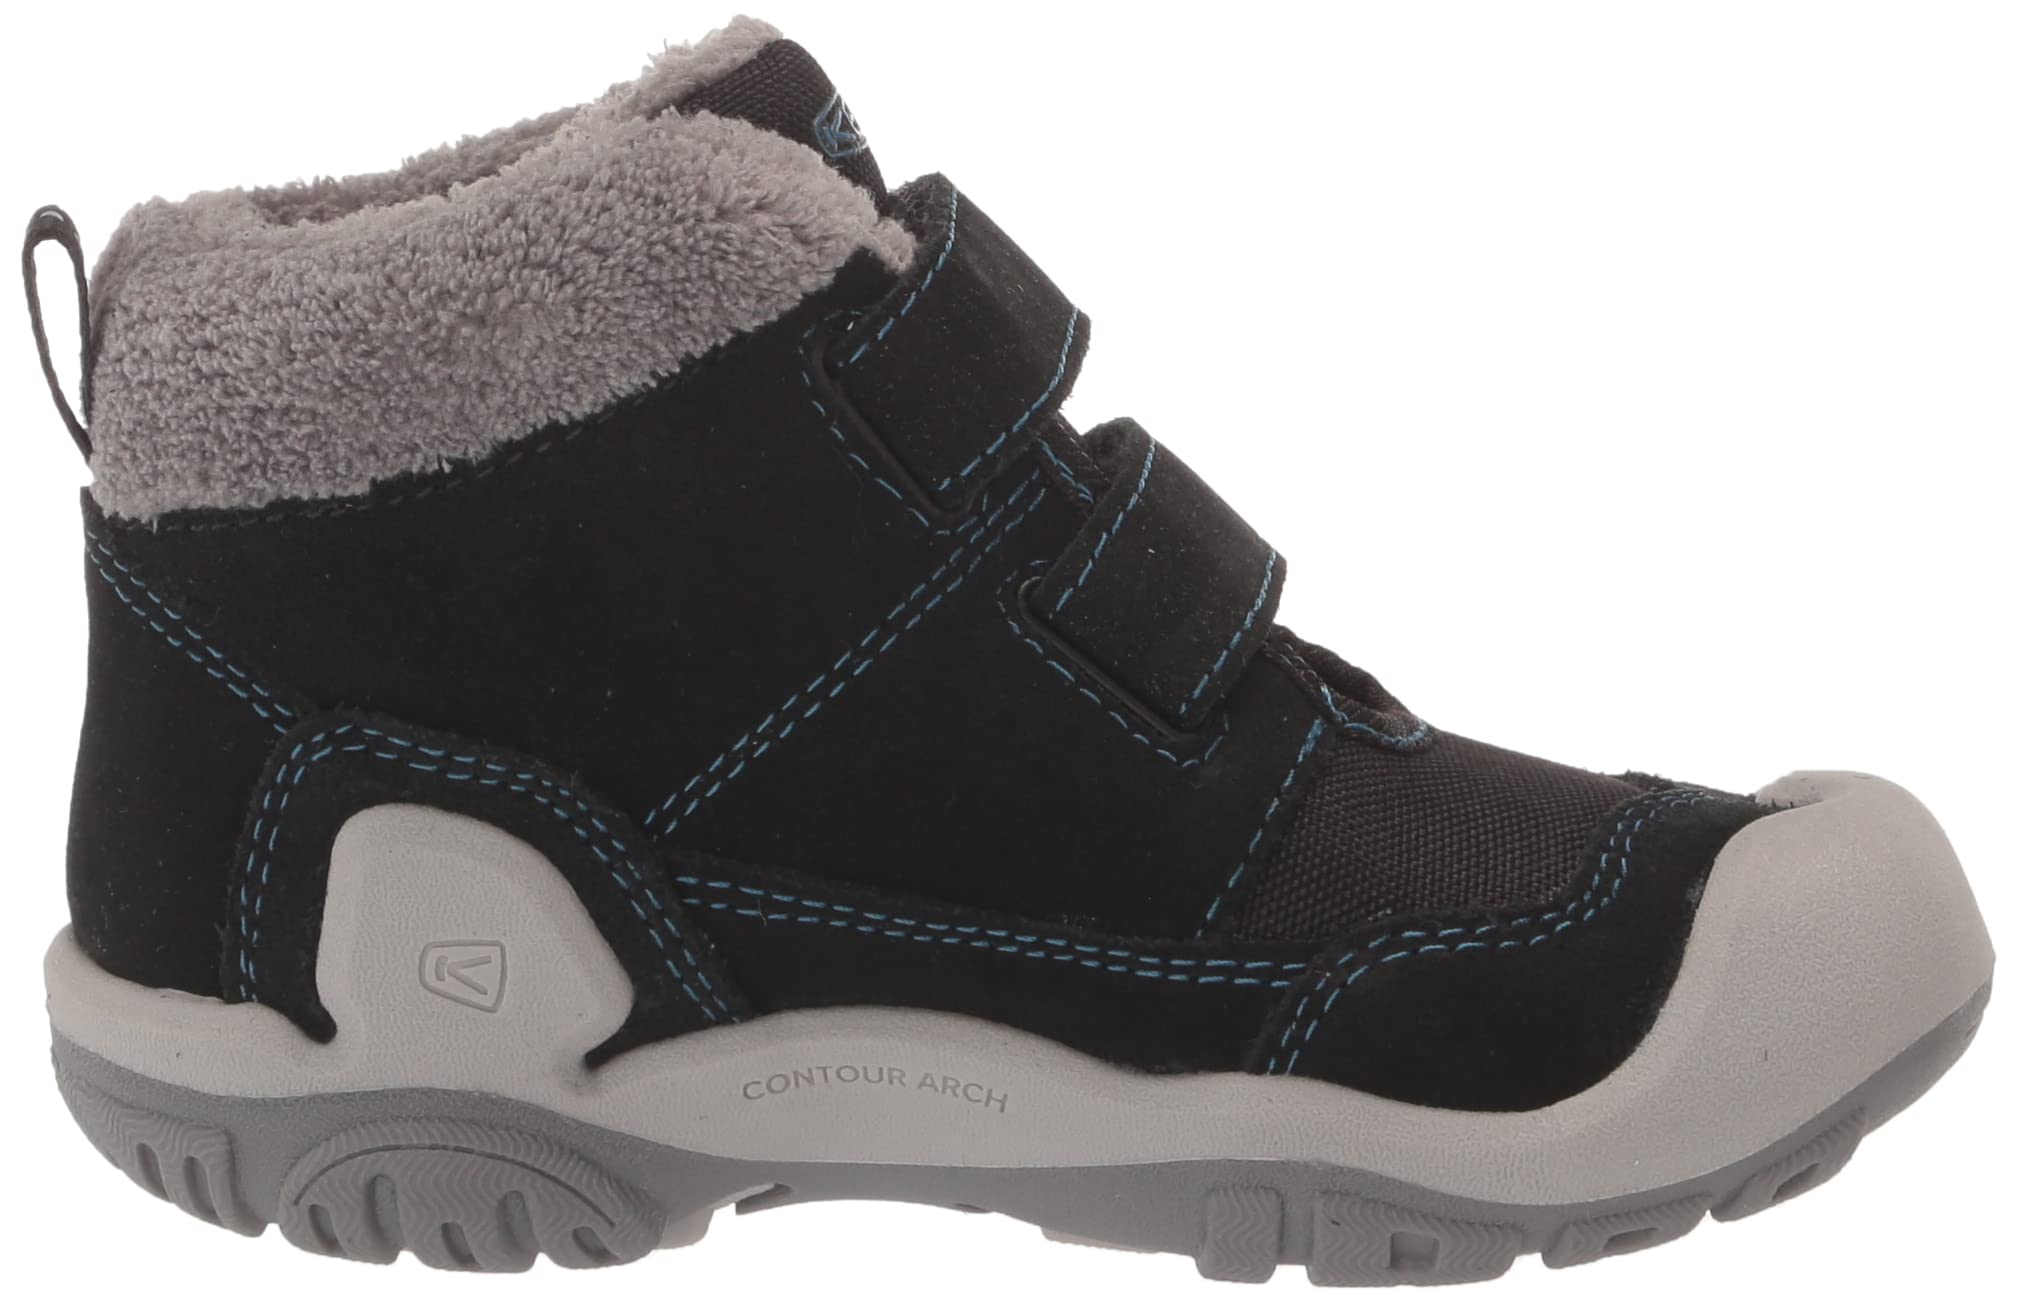 KEEN Unisex-Child Knotch Chukka Ds Mid Height Insulated Boots